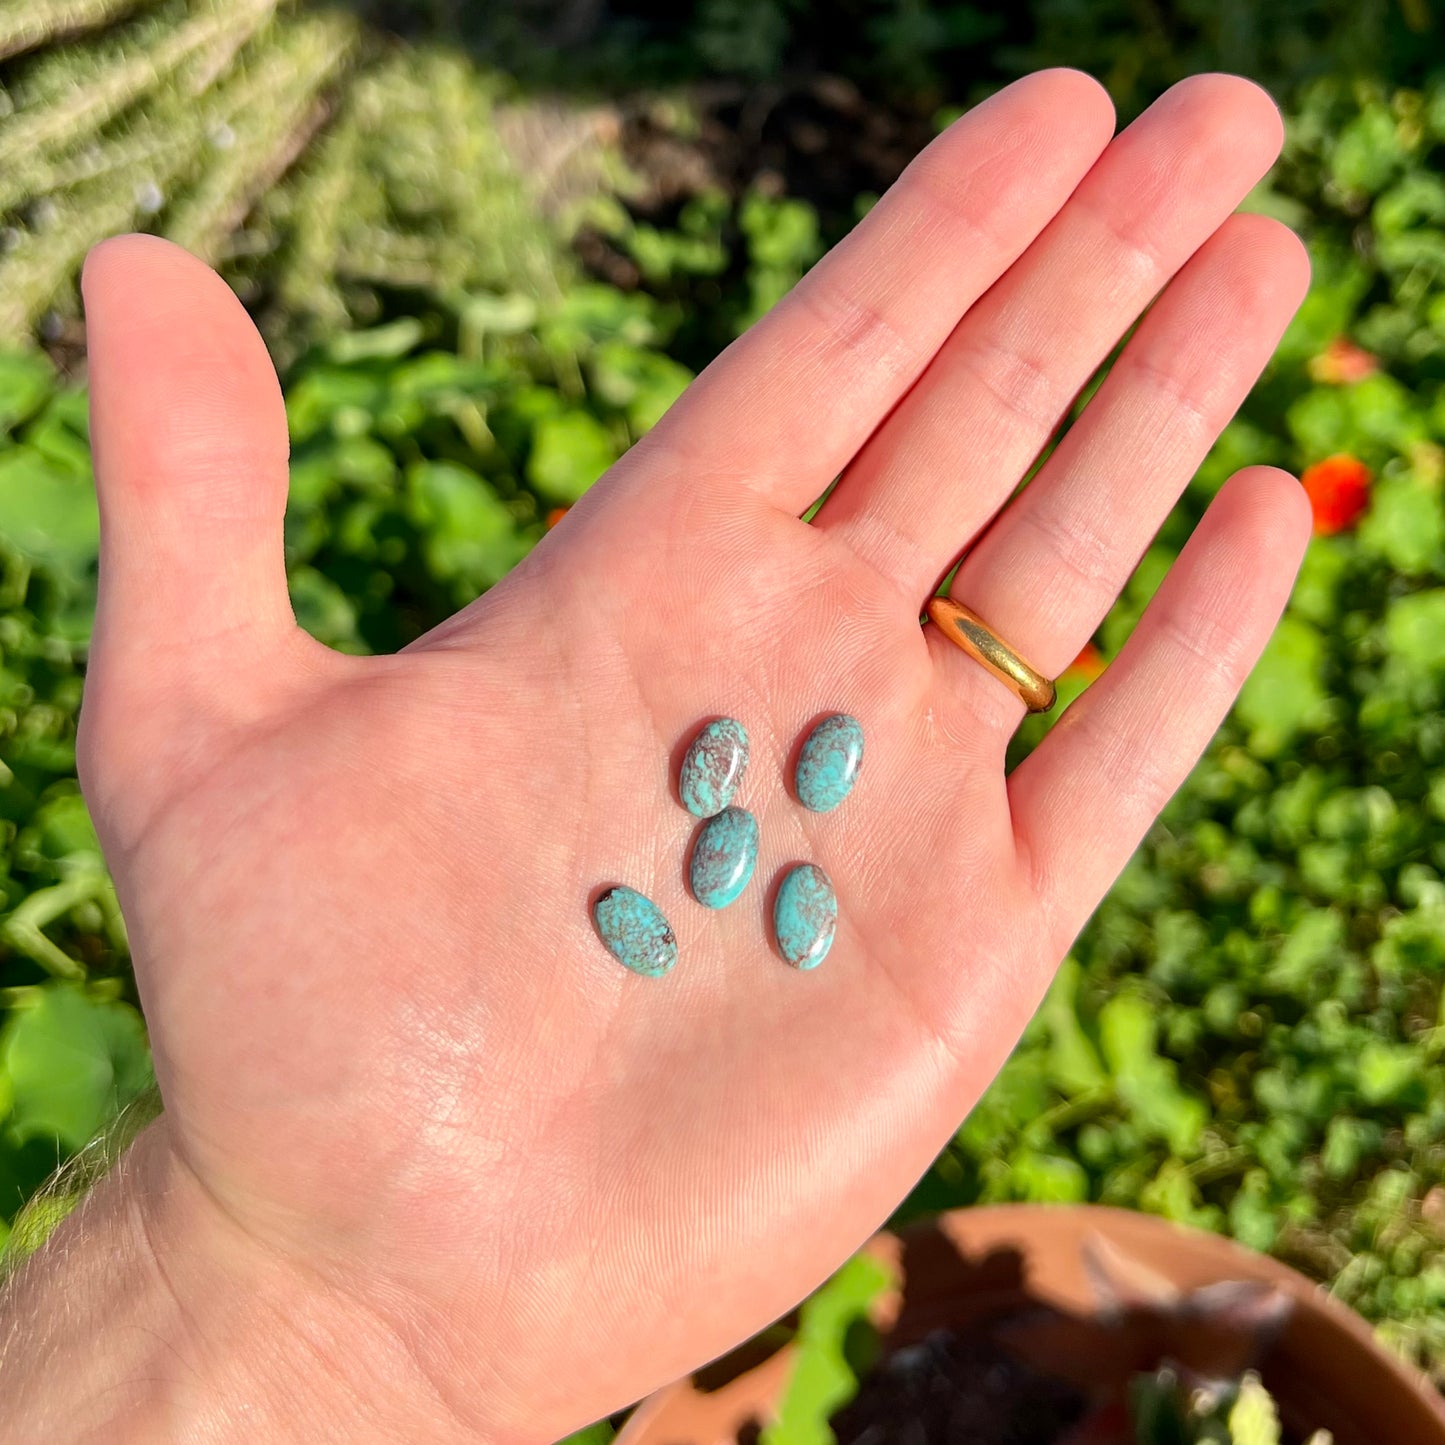 A loose lot of 5 oval cabochon cut Tyrone turquoise stones.  The stones are blue with red webbed matrix.